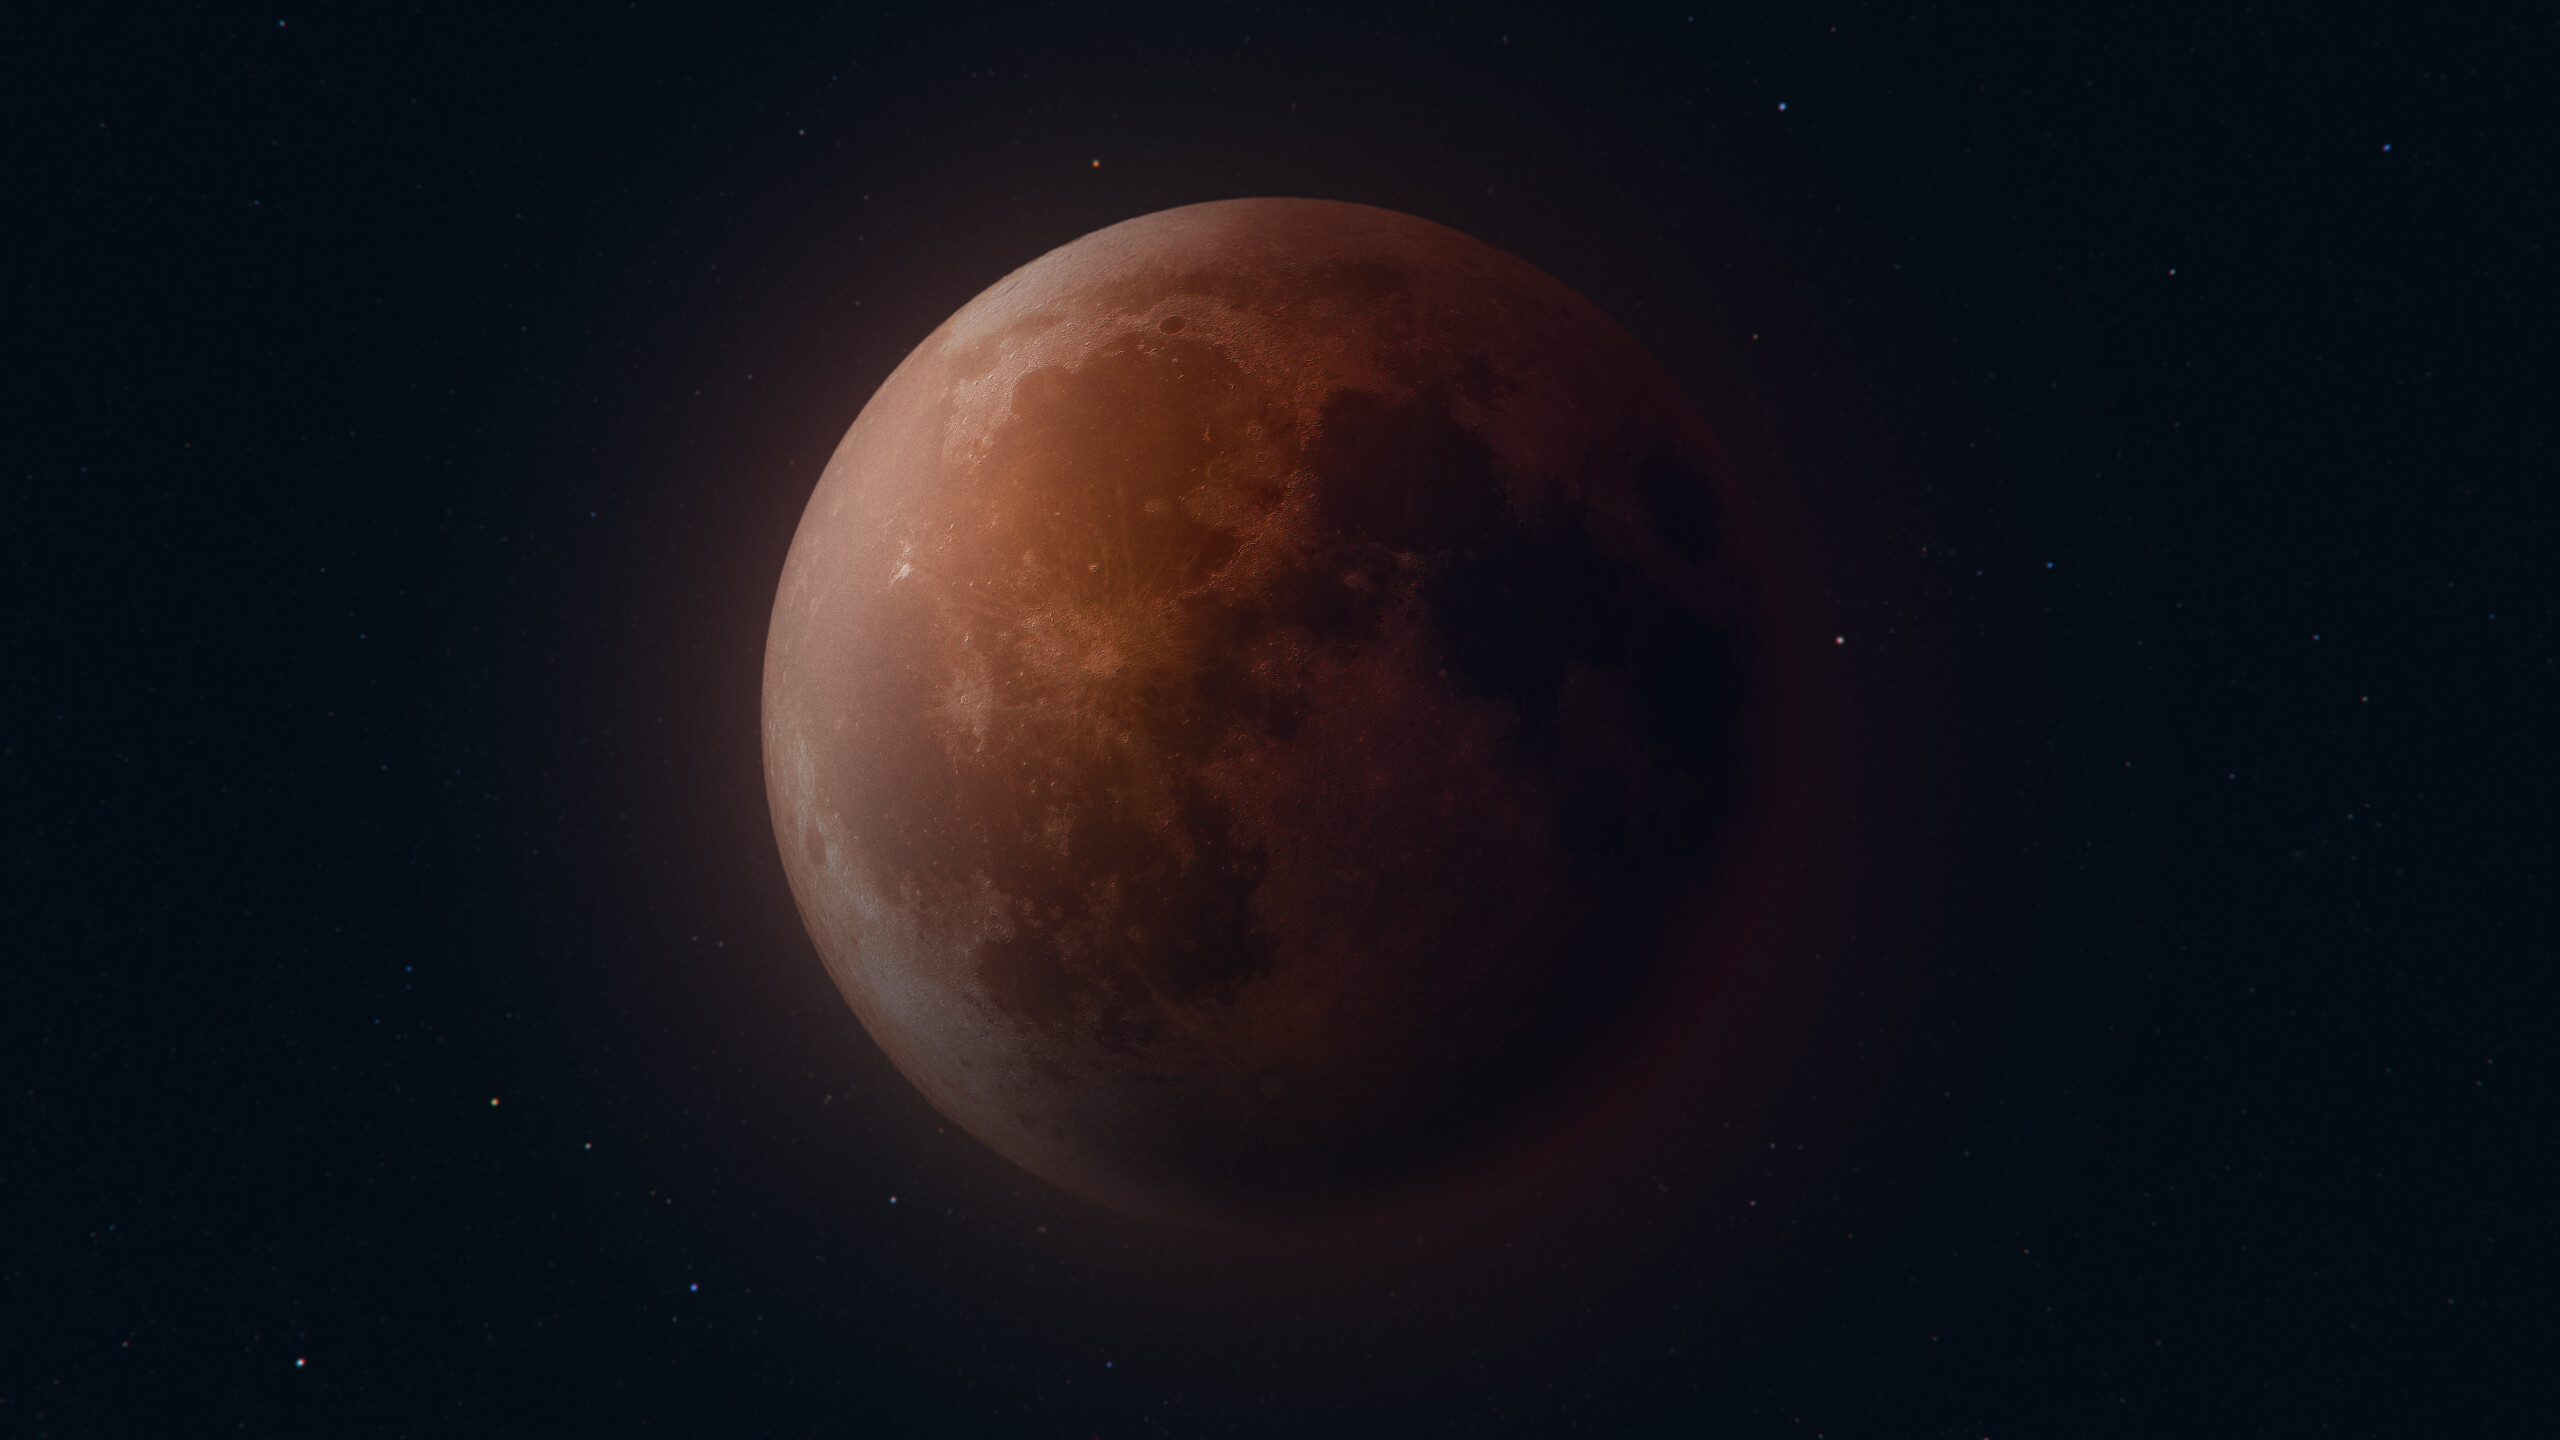 Close-up of lunar eclipse, Dark and mysterious, Enigmatic beauty, Astrological marvel, 2560x1440 HD Desktop